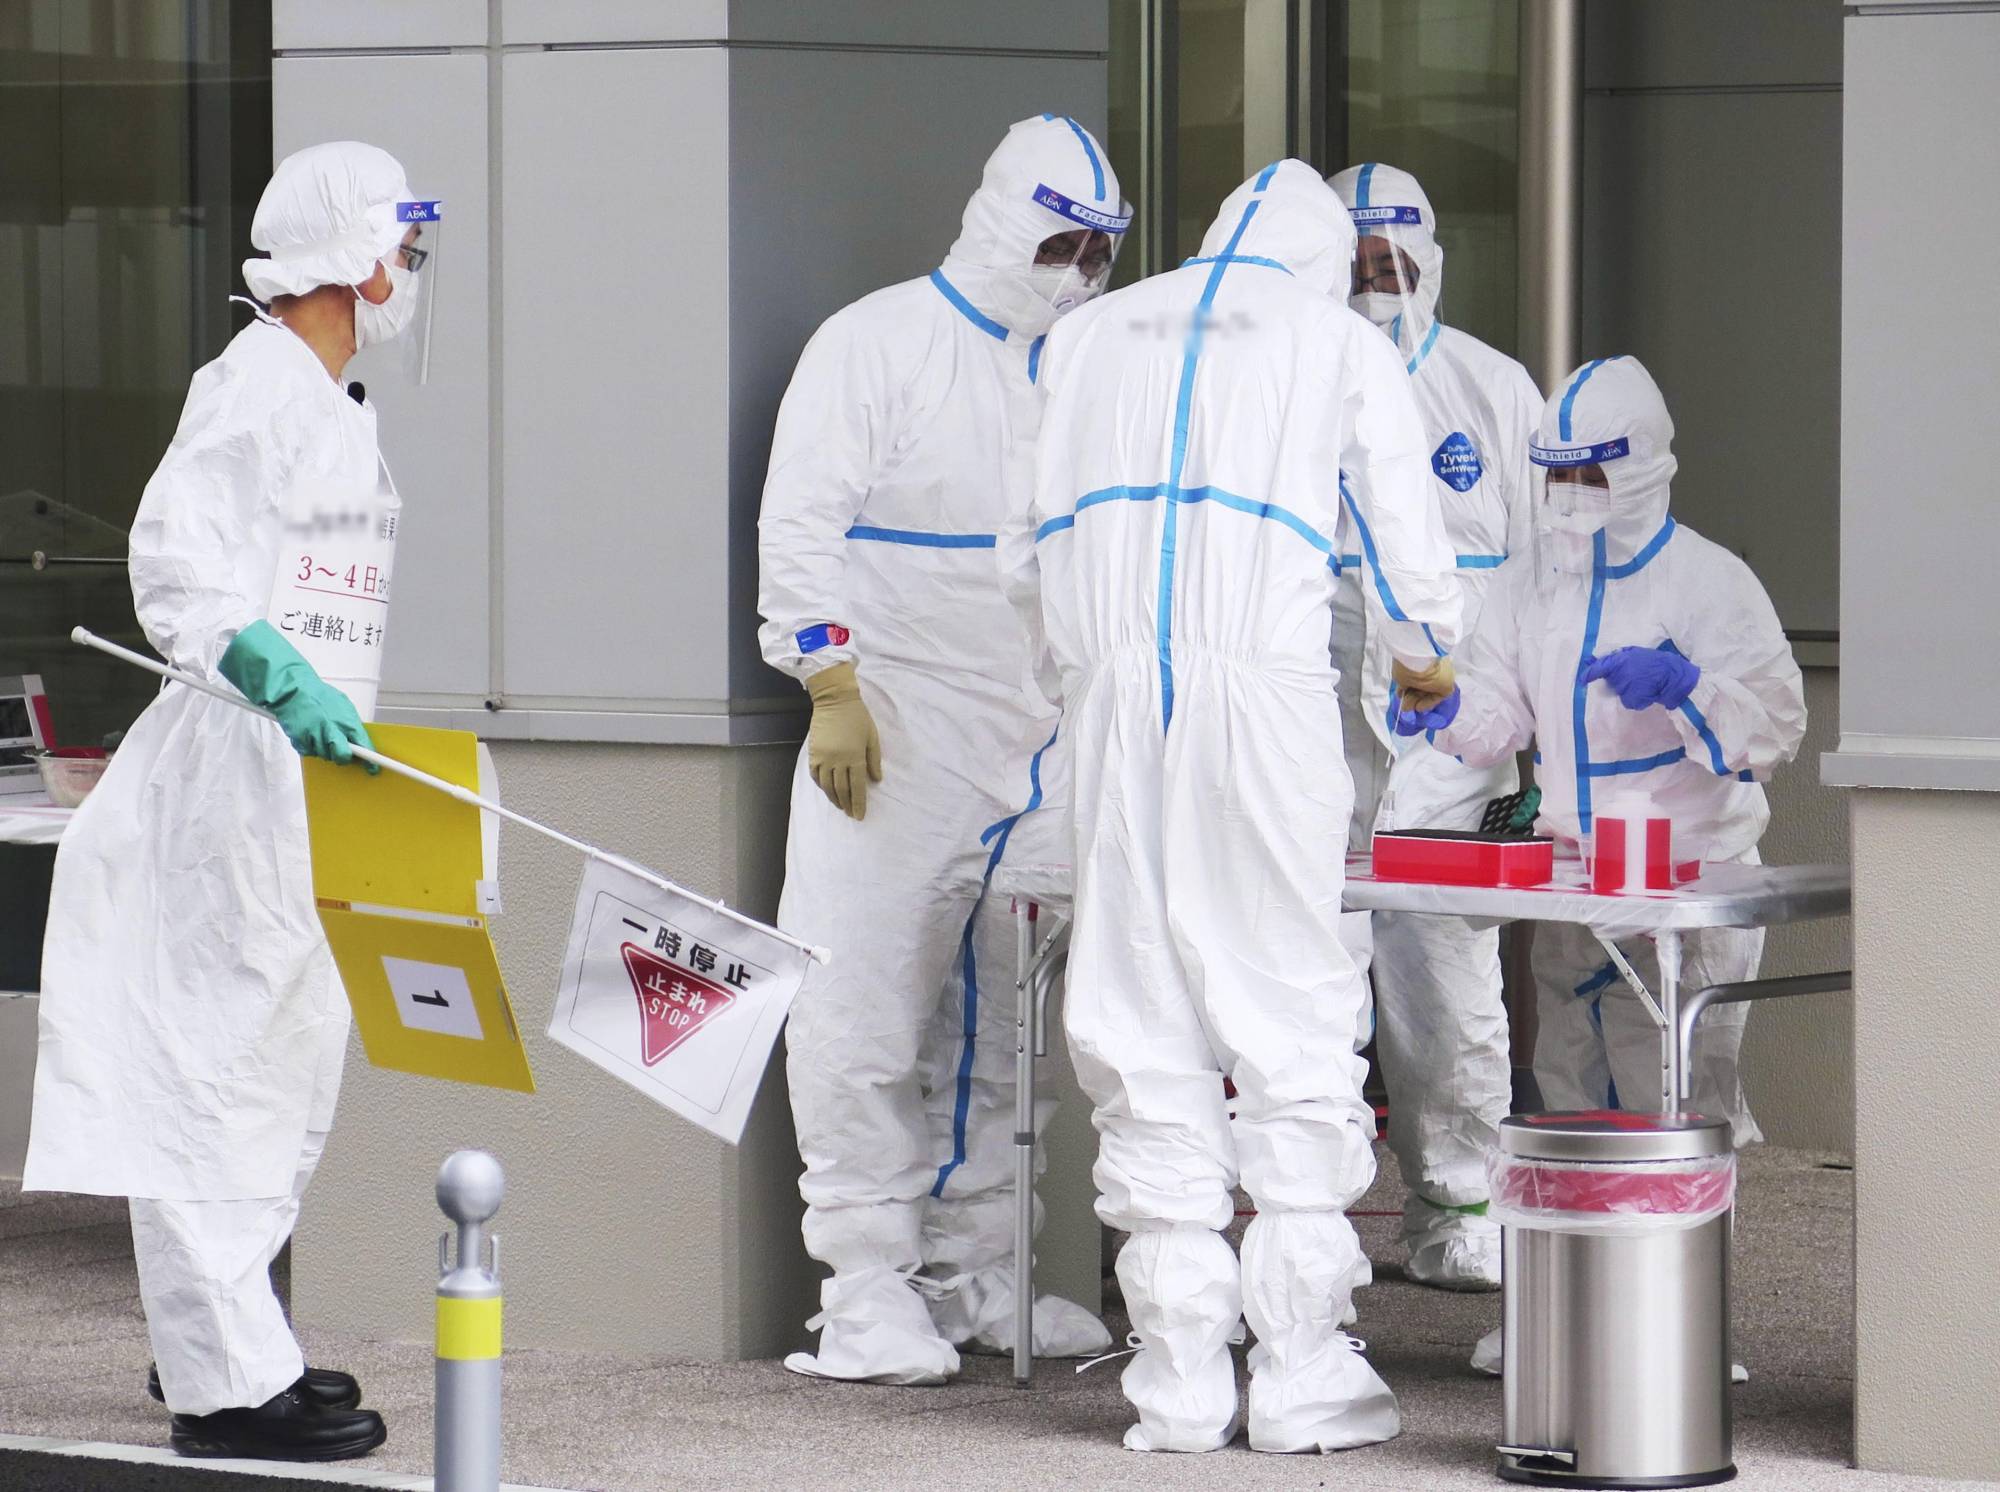 Doctors prepare for drive-through coronavirus testing on Monday in Koshigaya, Saitama Prefecture. Even after the state of emergency is lifted in Japan, experts agree that more testing will be crucial to permanently contain the virus. | KYODO